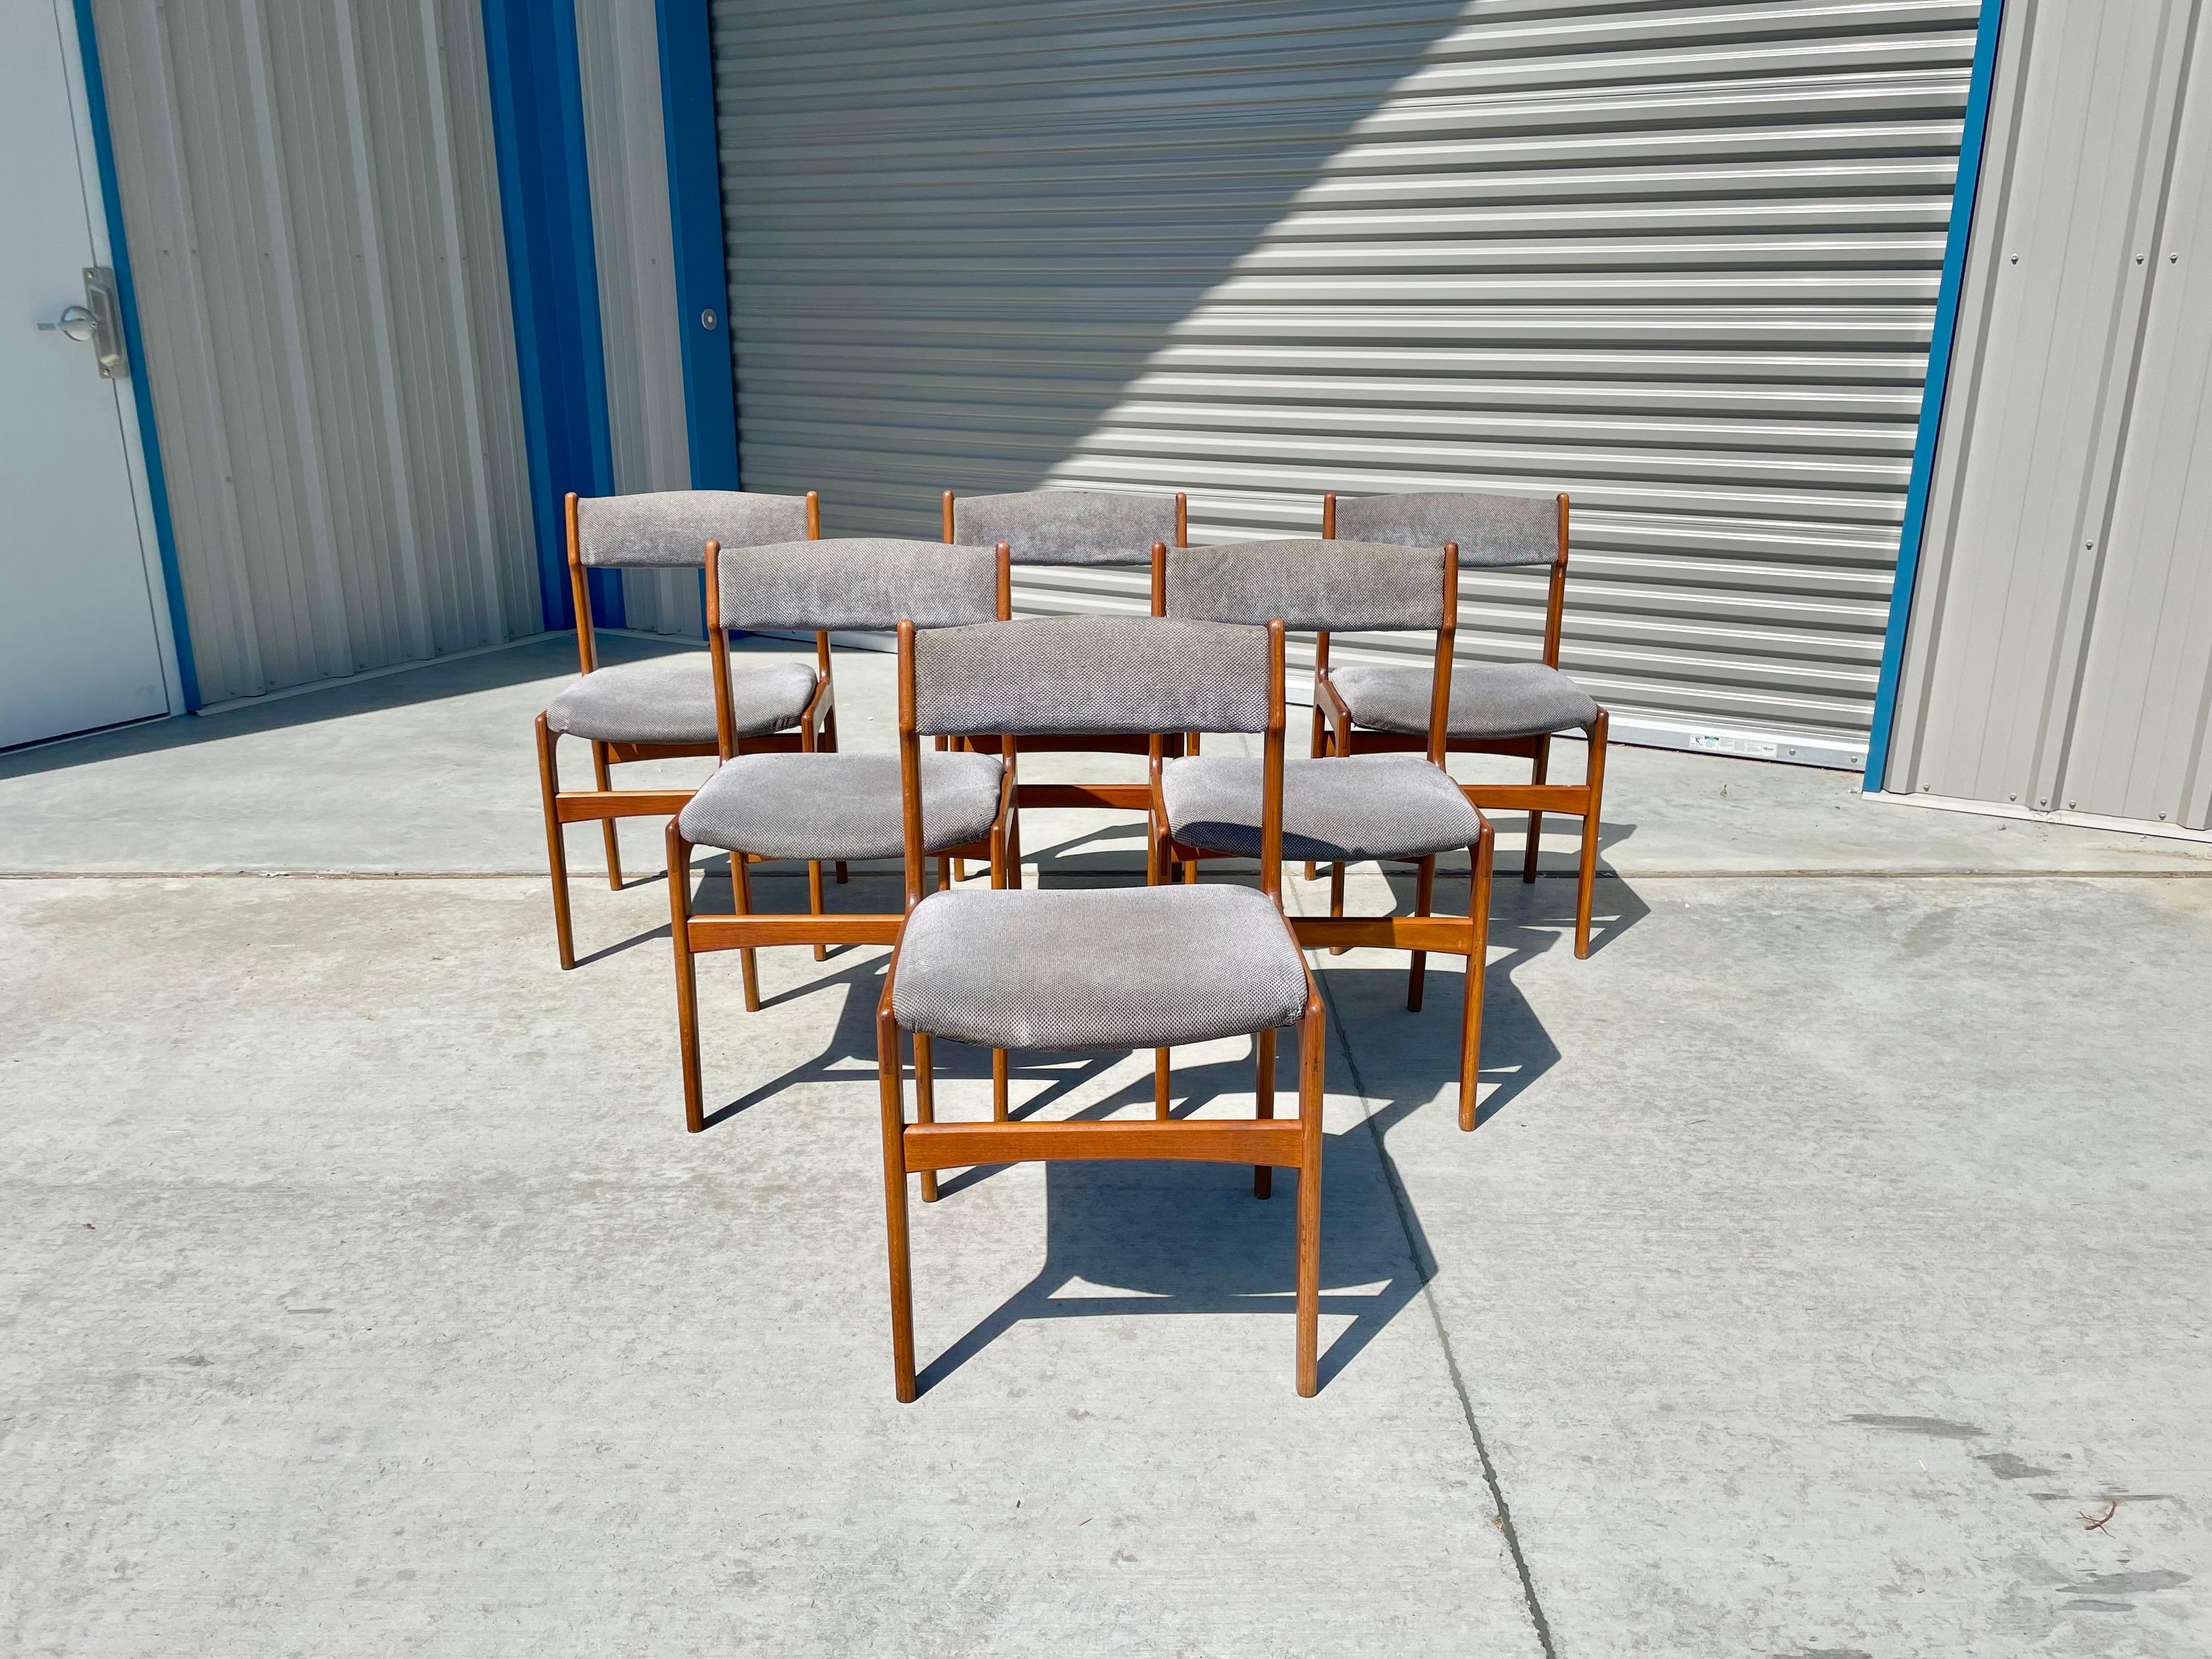 Danish modern teak dining chairs were designed and manufactured in Denmark circa 1960s. These stunning dining chairs feature a strong teak frame creating a refined and elegant look. The chairs also feature a gray upholstery, perfect for your next